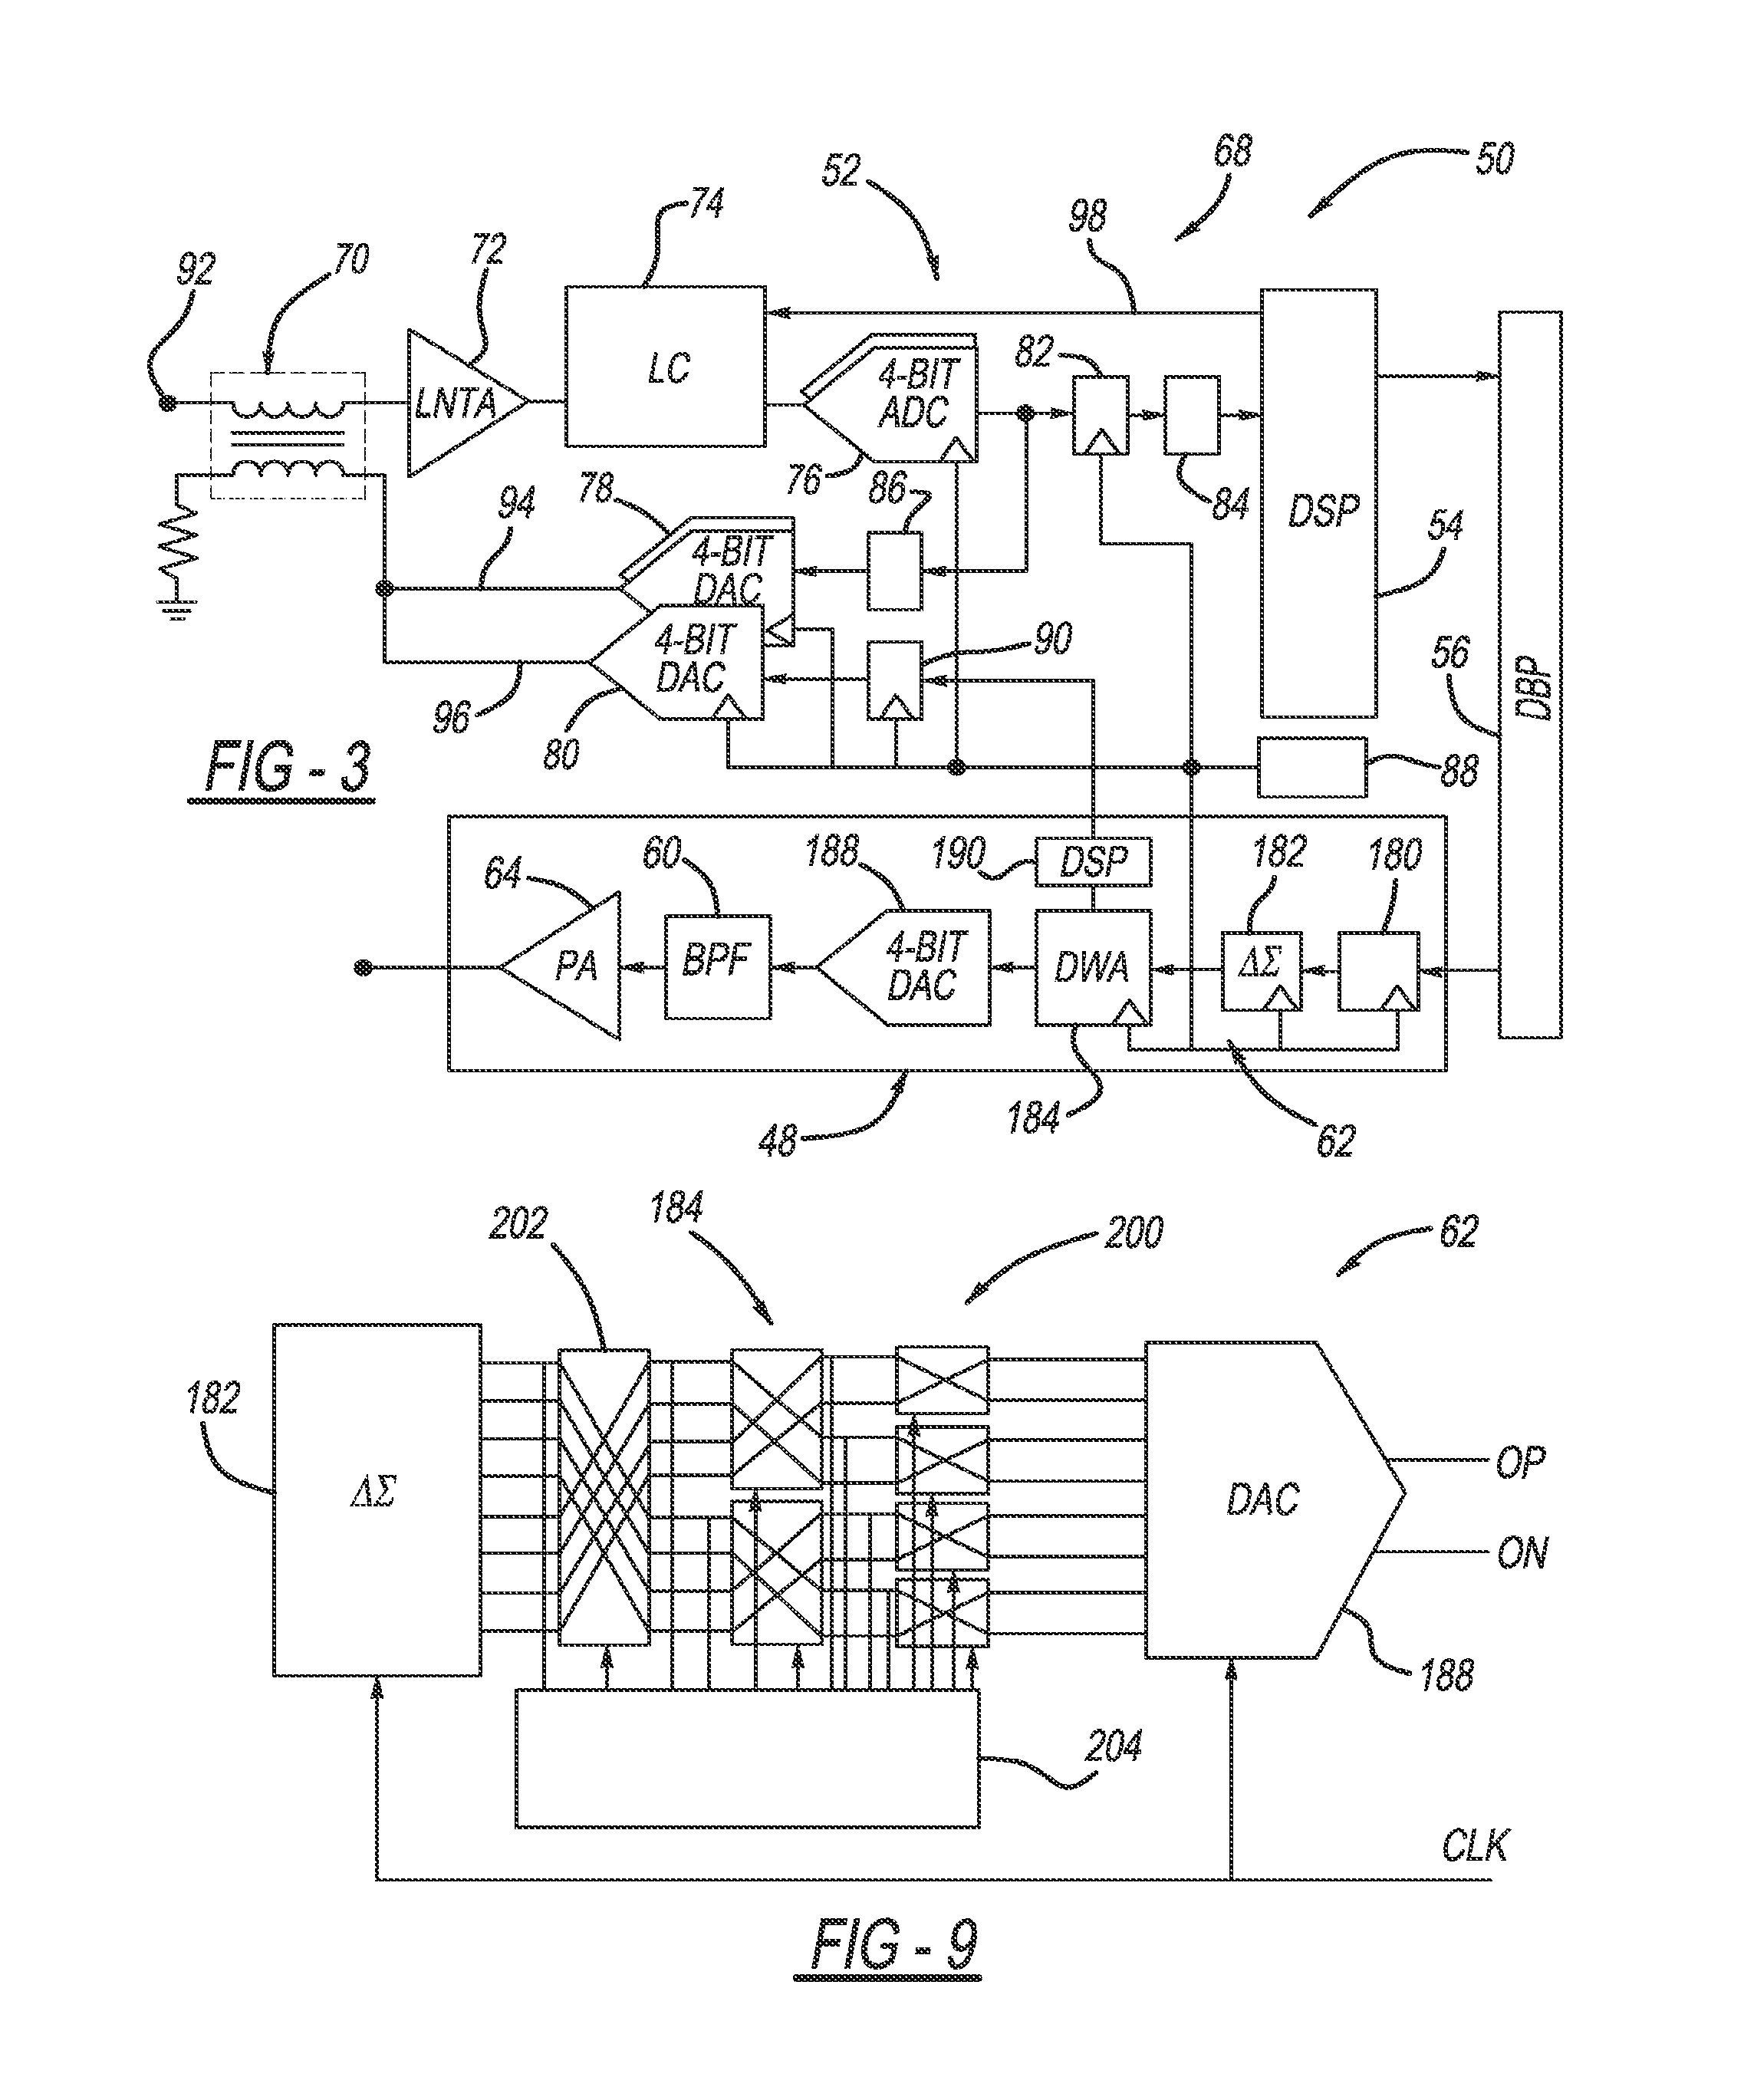 Optimized data converter design using mixed semiconductor technology for flexible radio communication systems